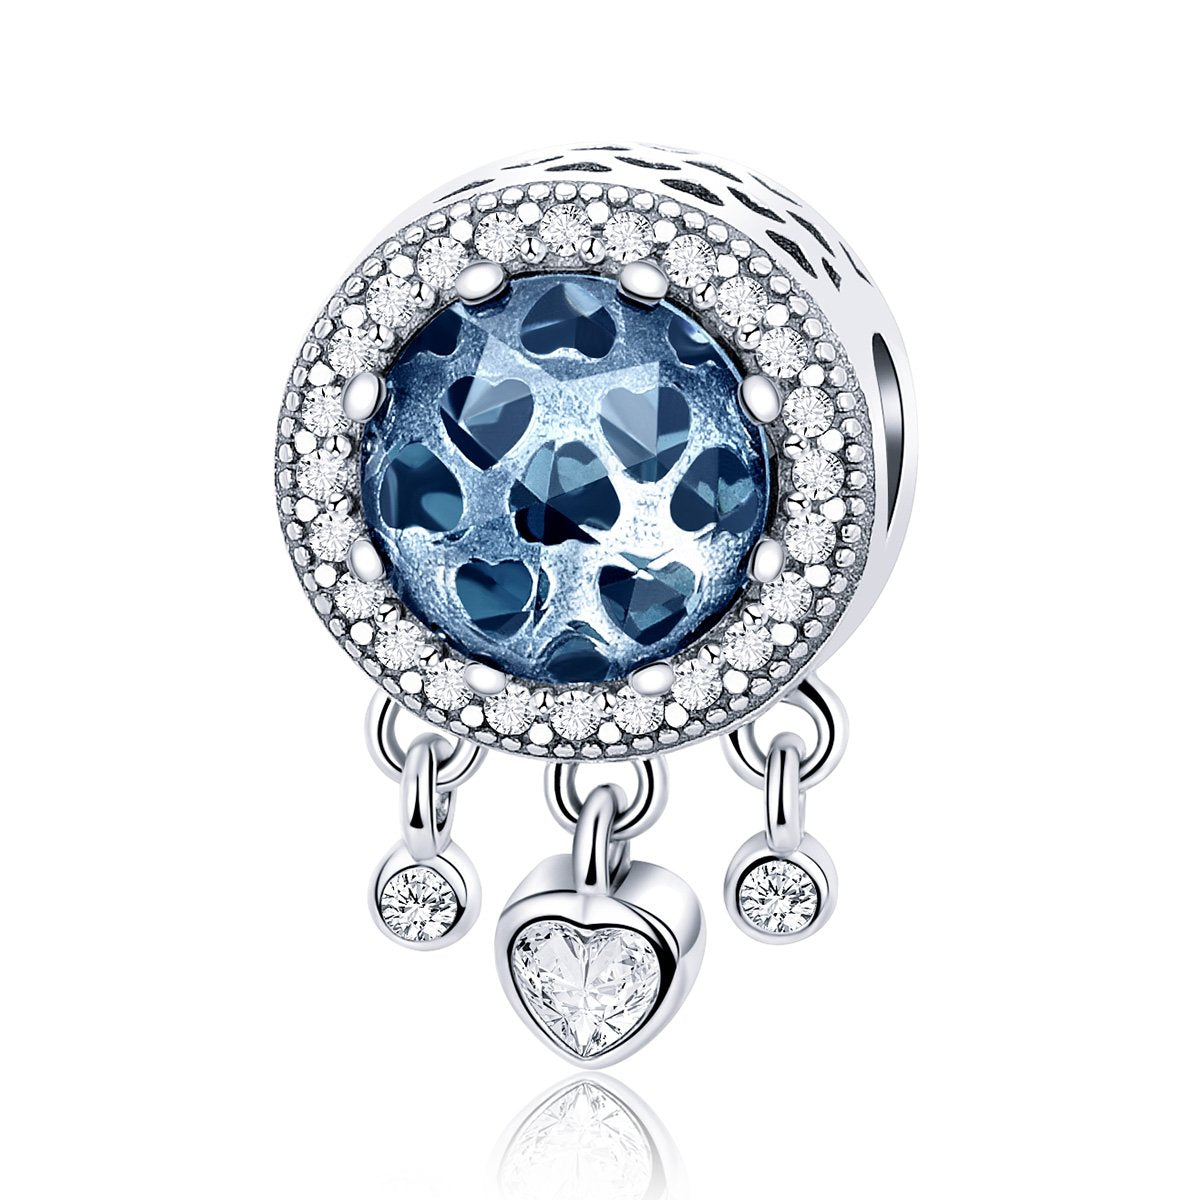 Sterling 925 silver charm the dangling blue cat eye in hand fits Pandora charm and European charm bracelet Xaxe.com